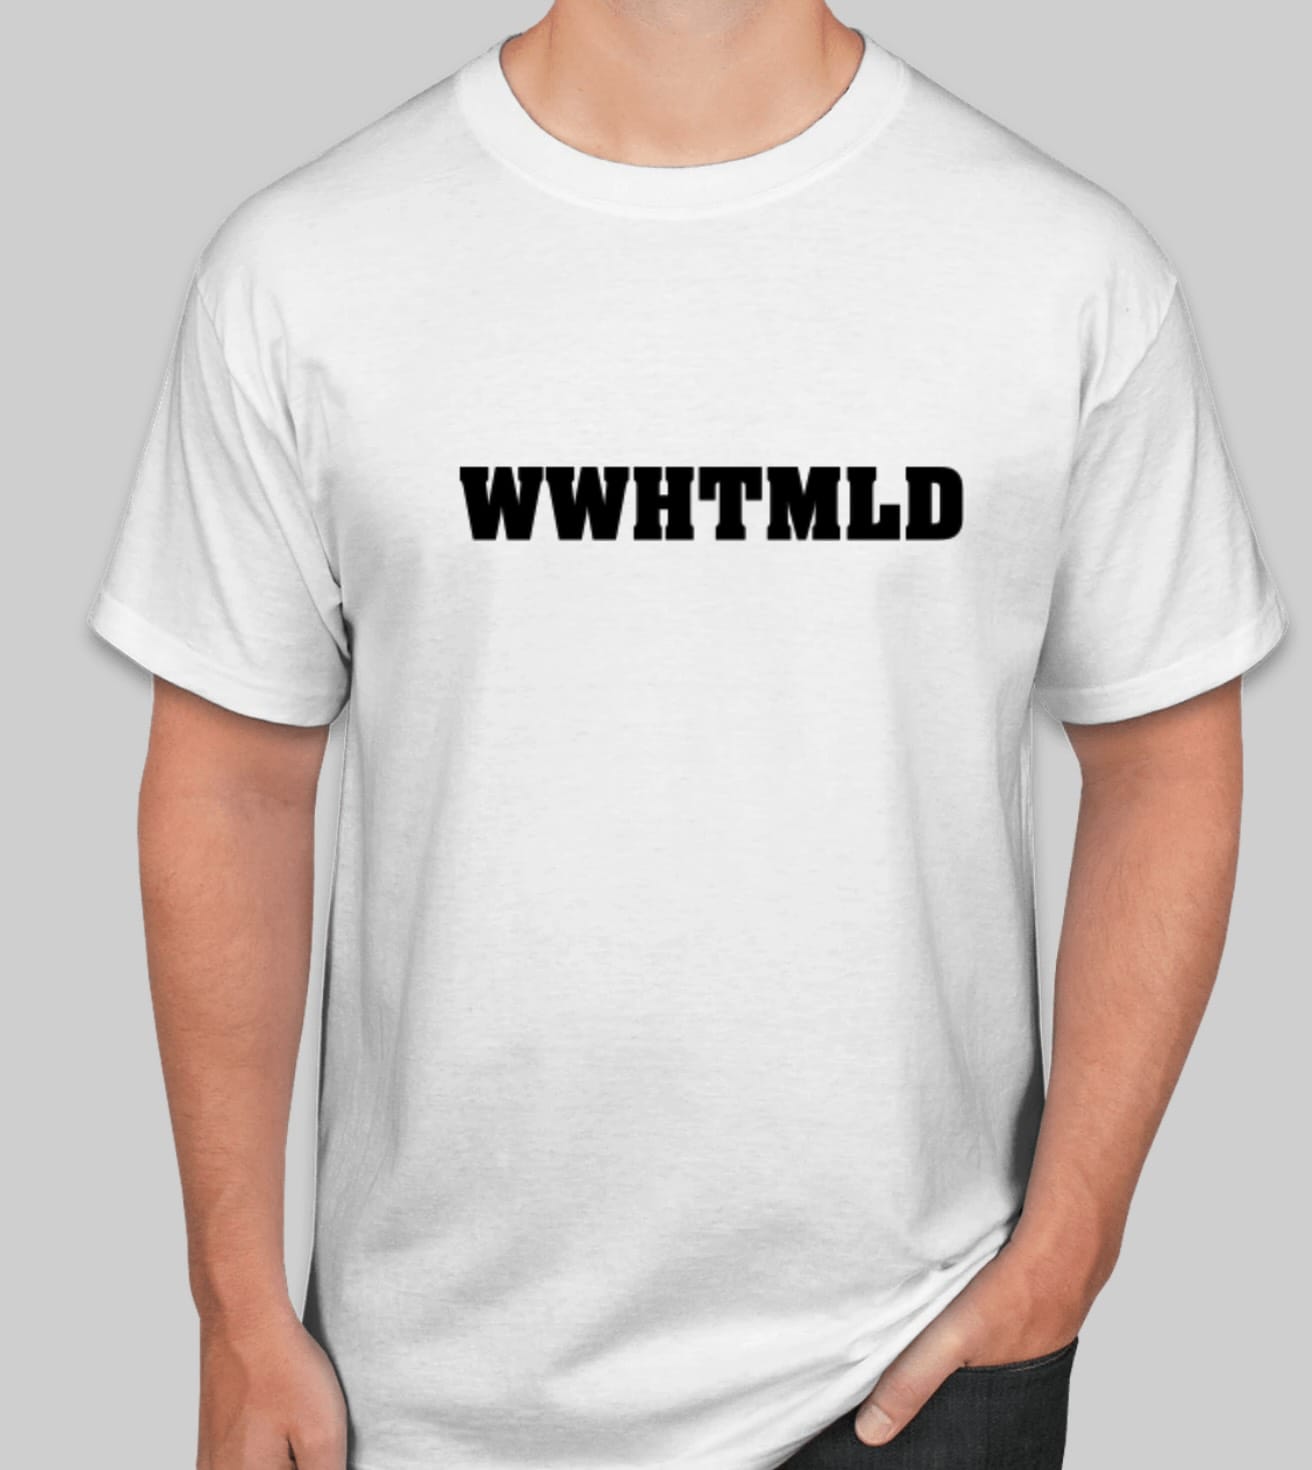 Photo of a plain white tshirt with big bold letters that say 'WEHTMLD'